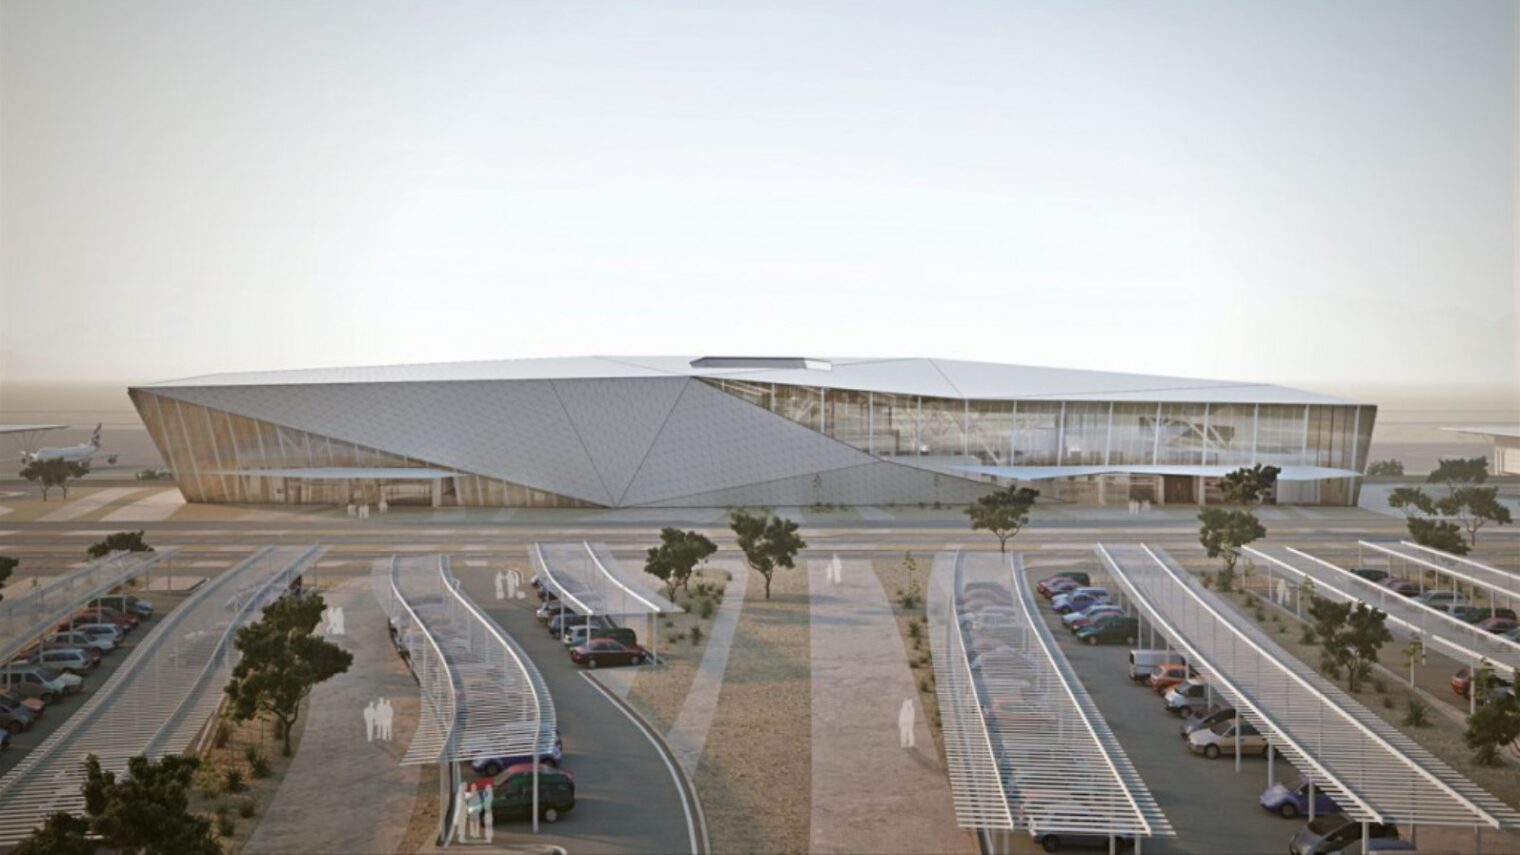 Architect’s rendering of the Eilat Ramon Airport terminal building. Photo: courtesy